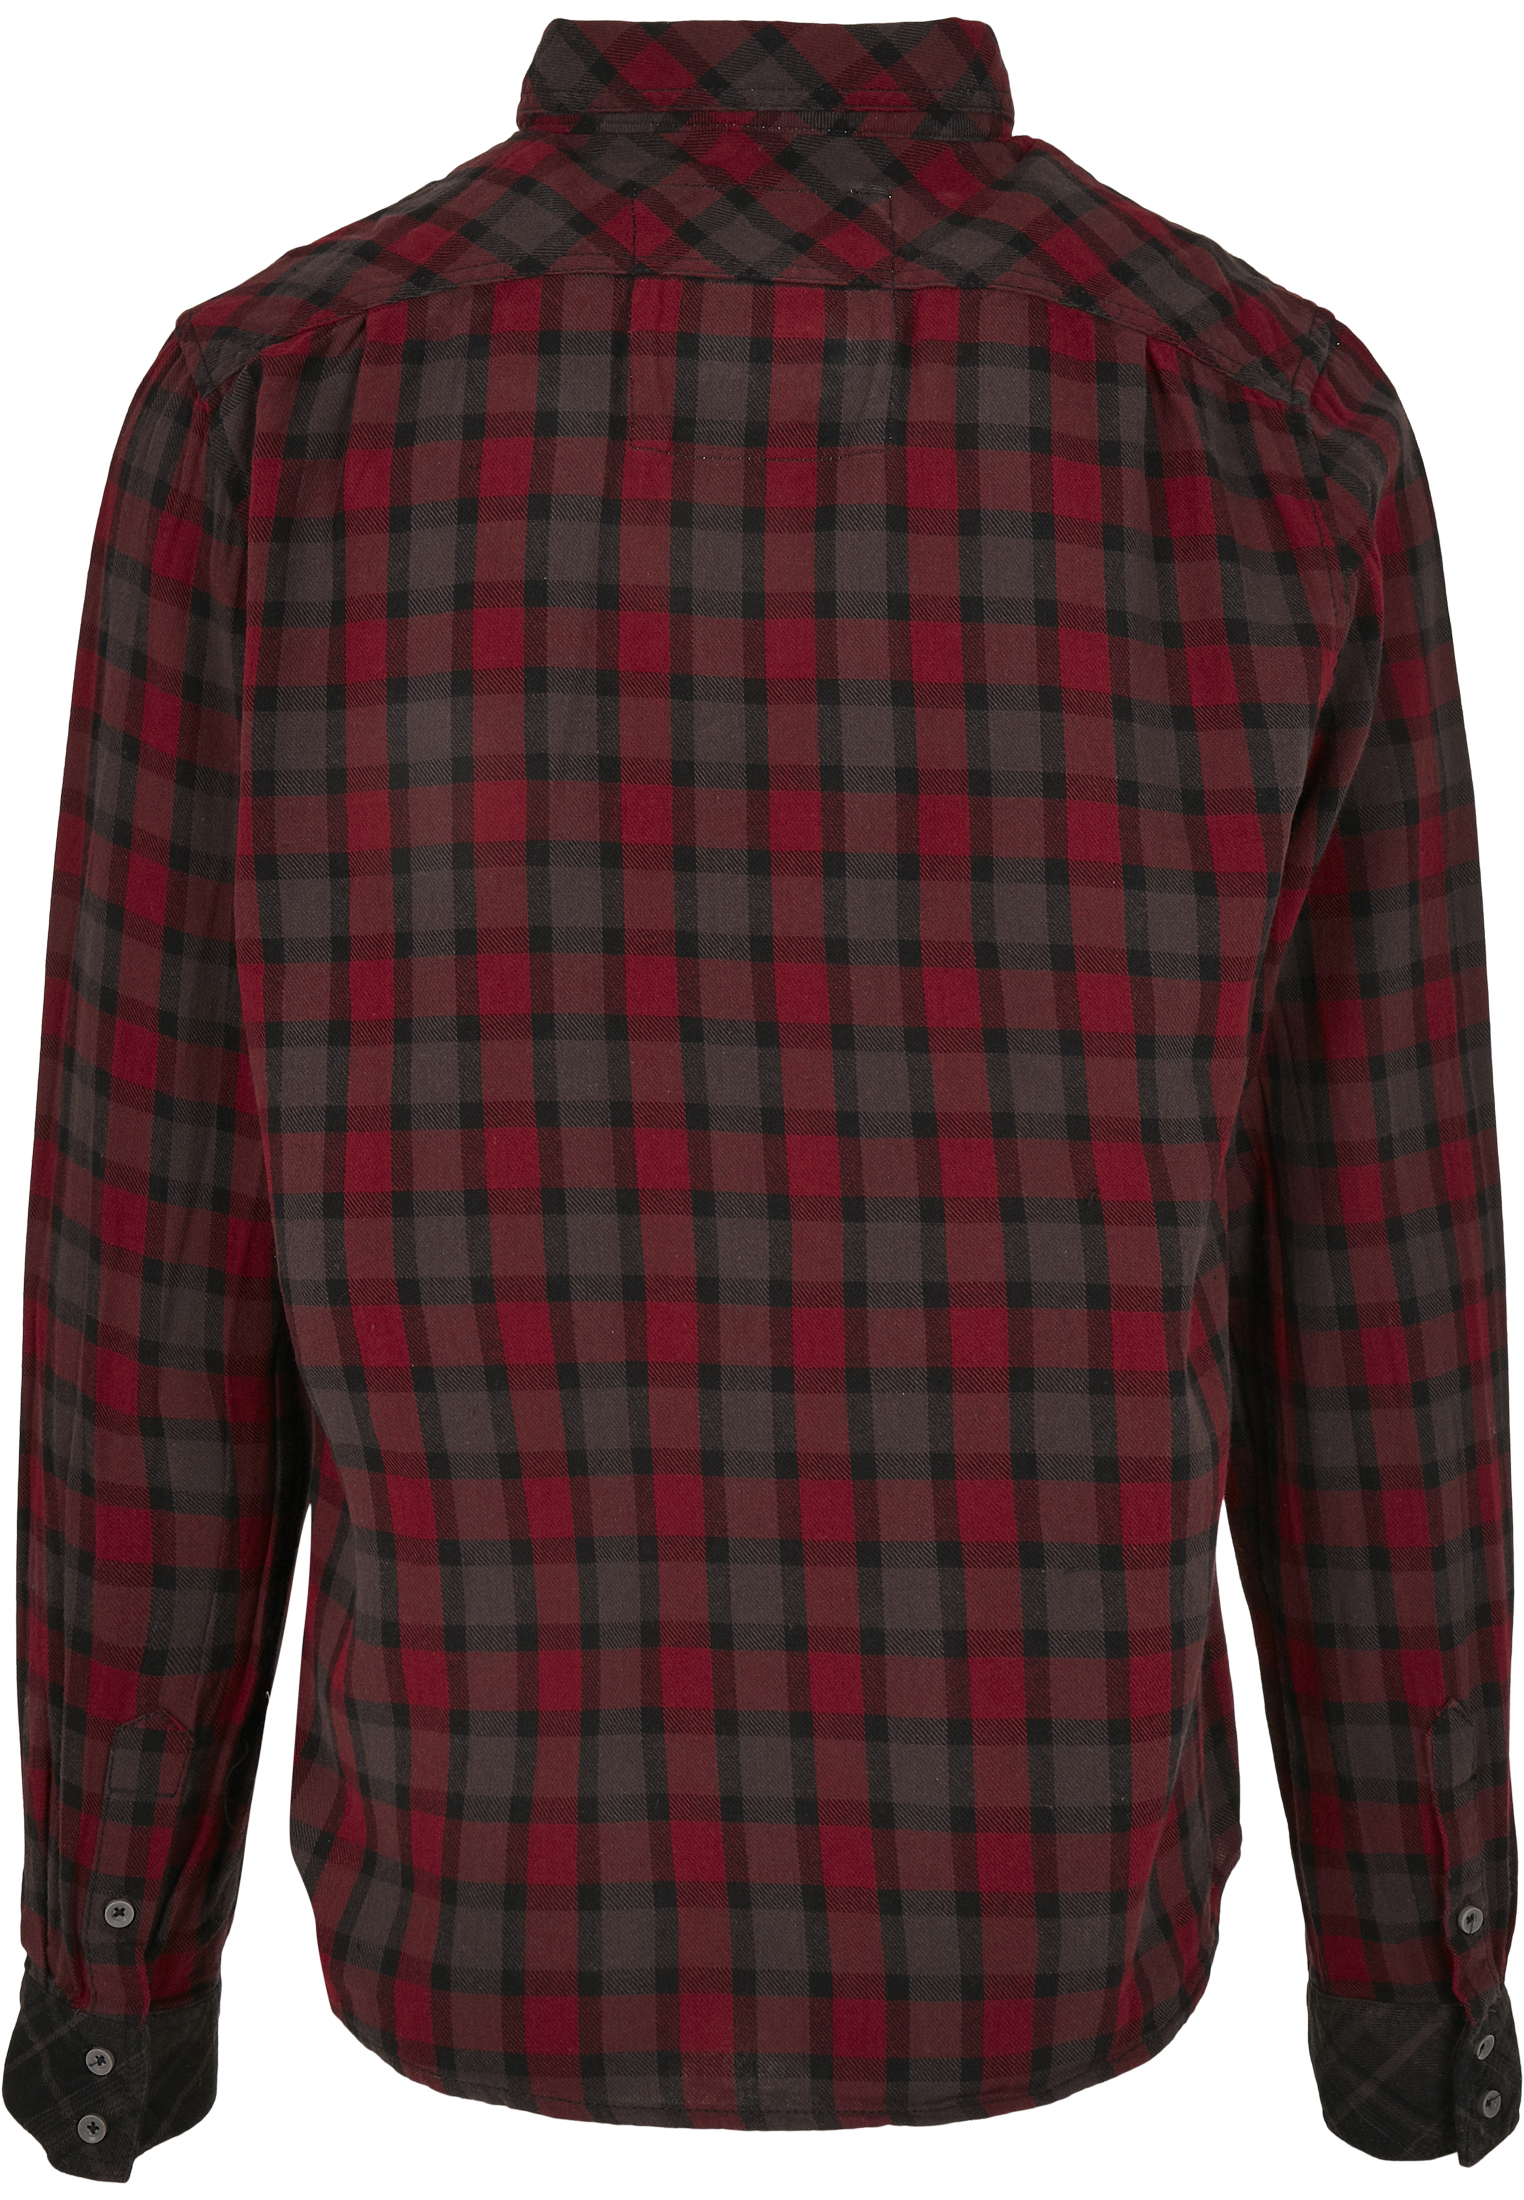 Hemden Duncan Checked Shirt in Farbe red/brown